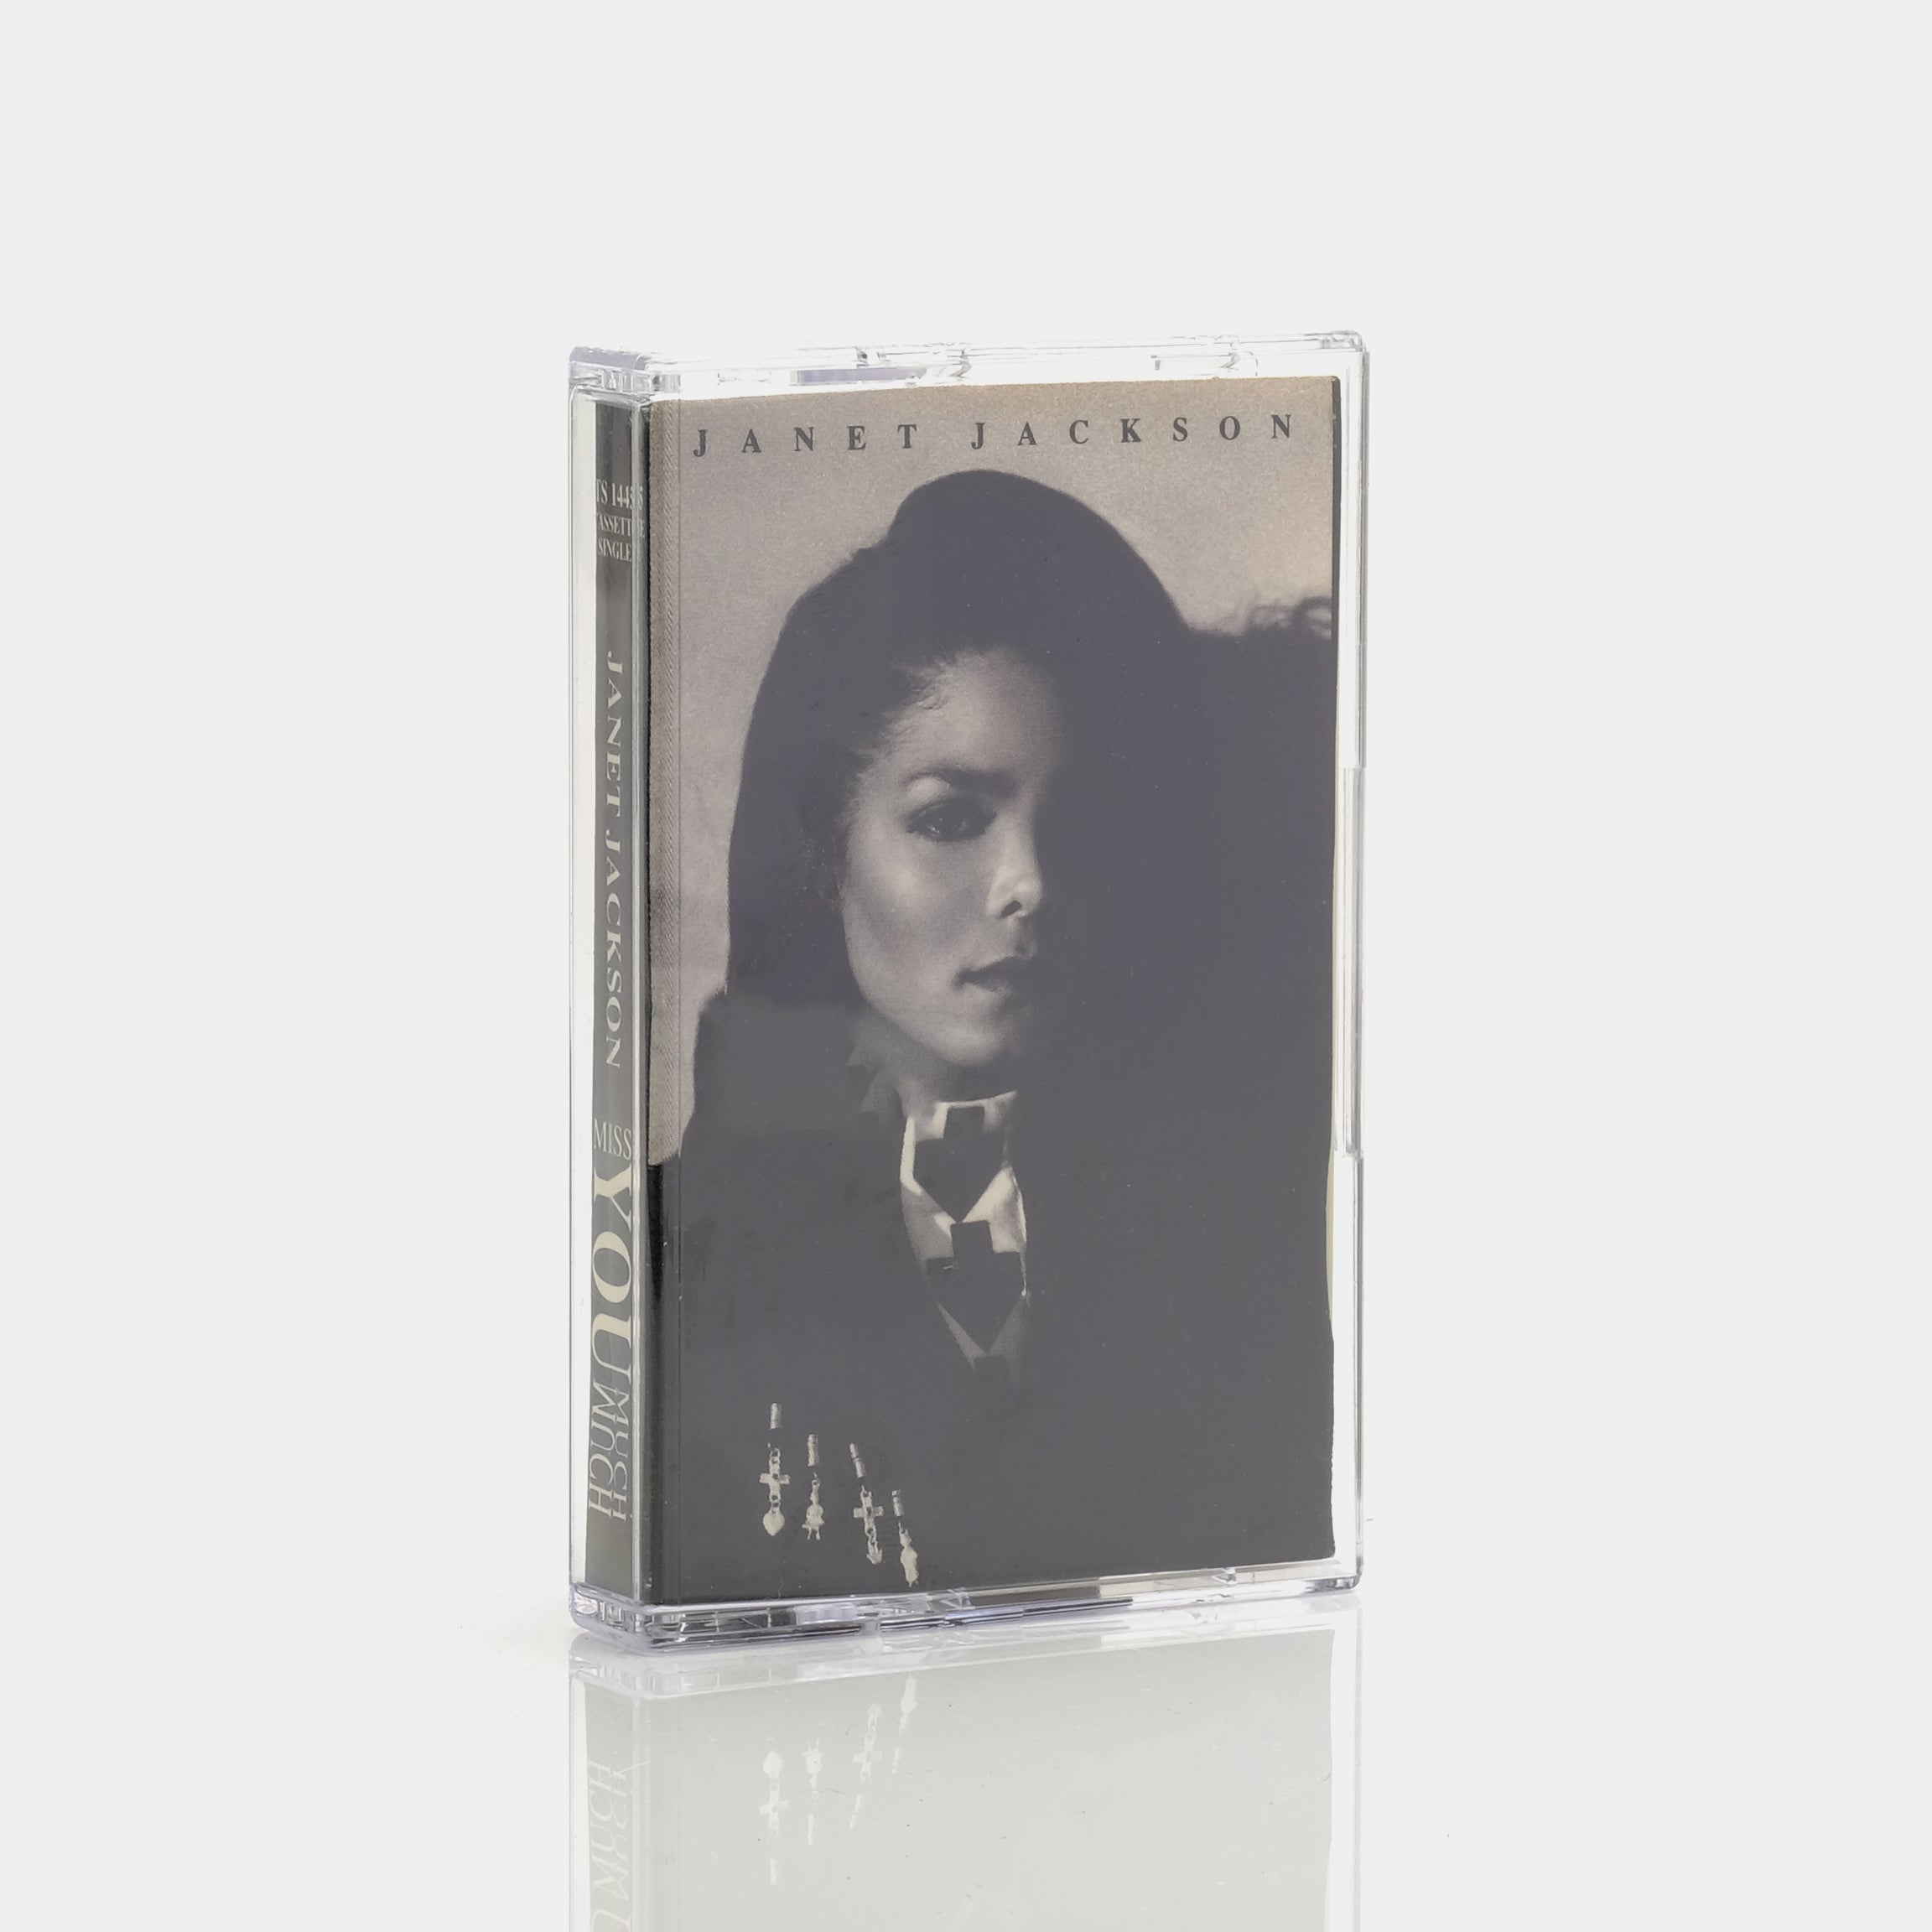 Janet Jackson - Miss You Much Cassette Tape Single